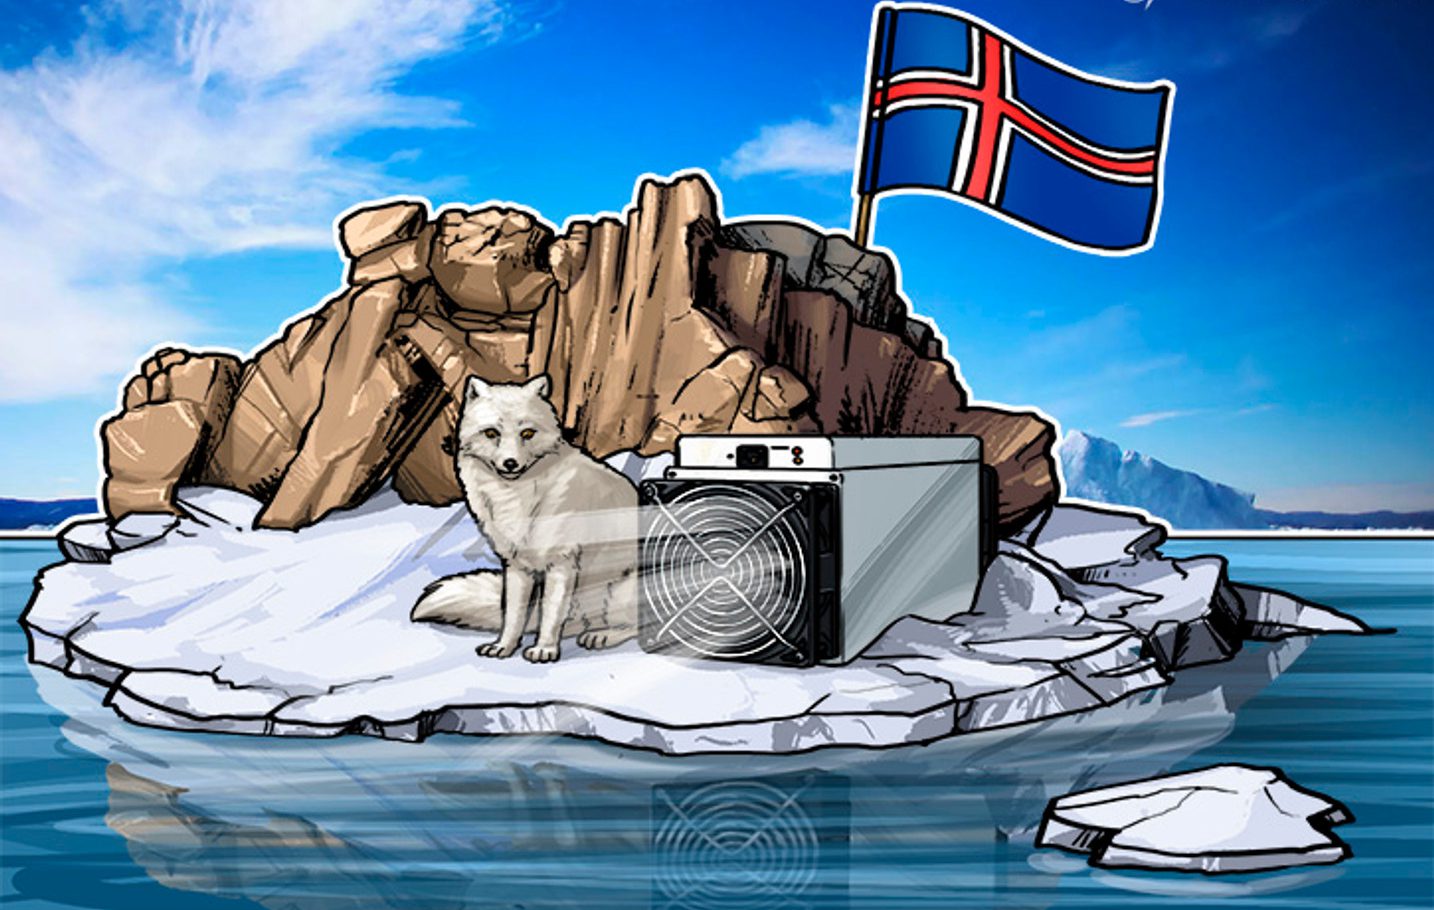 Iceland – world’s leading digital currency miner